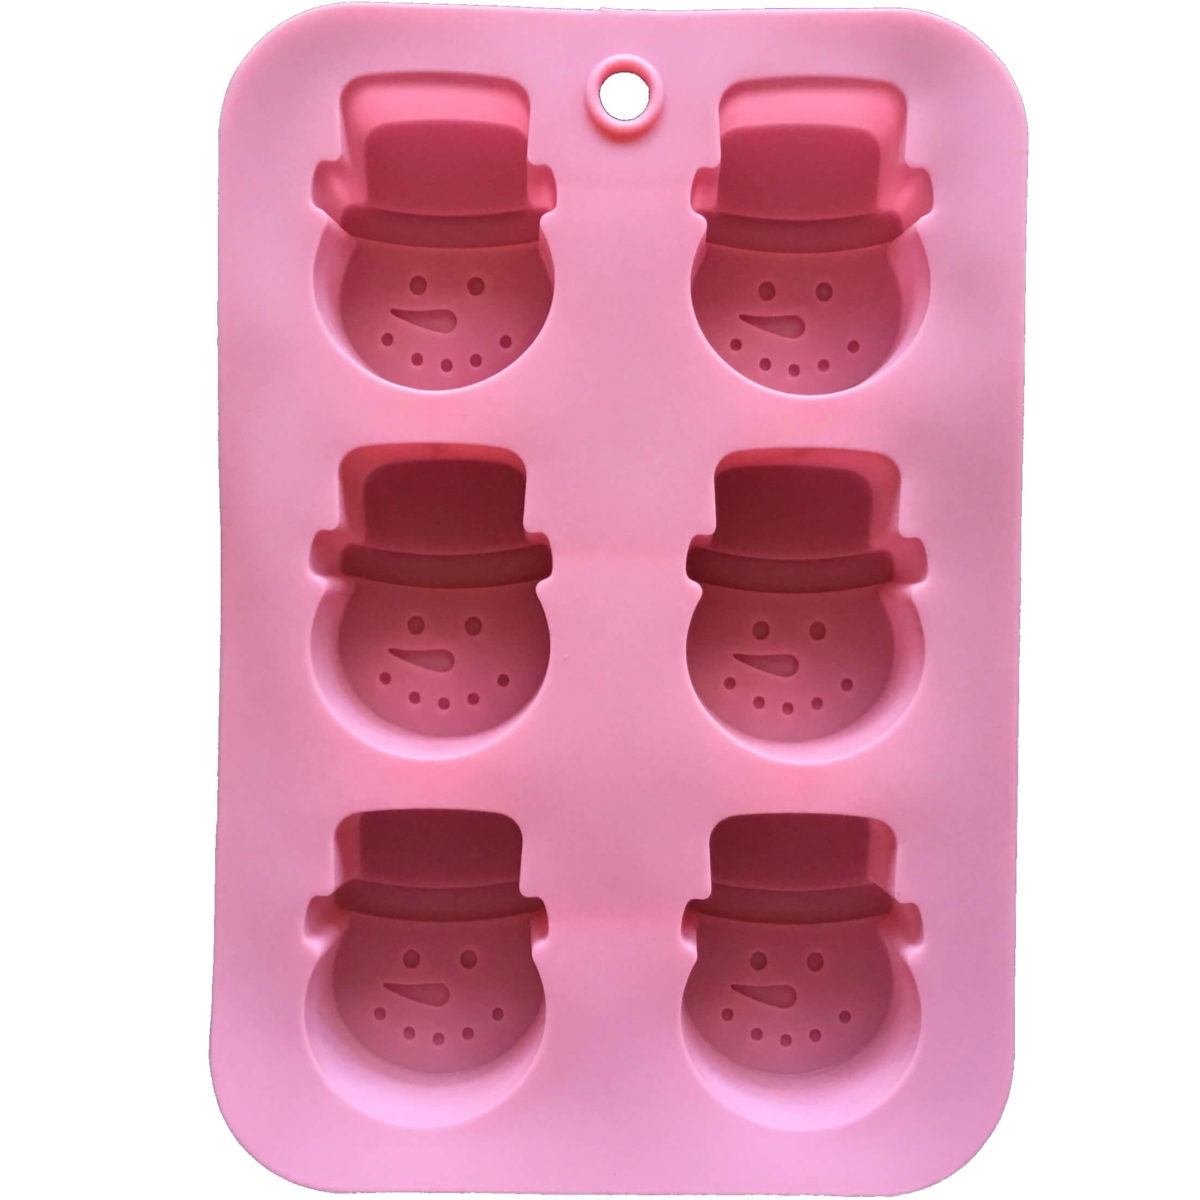 back of pink six cavity silicone mould with identical snowman head-shaped cavities showing mould cavity details